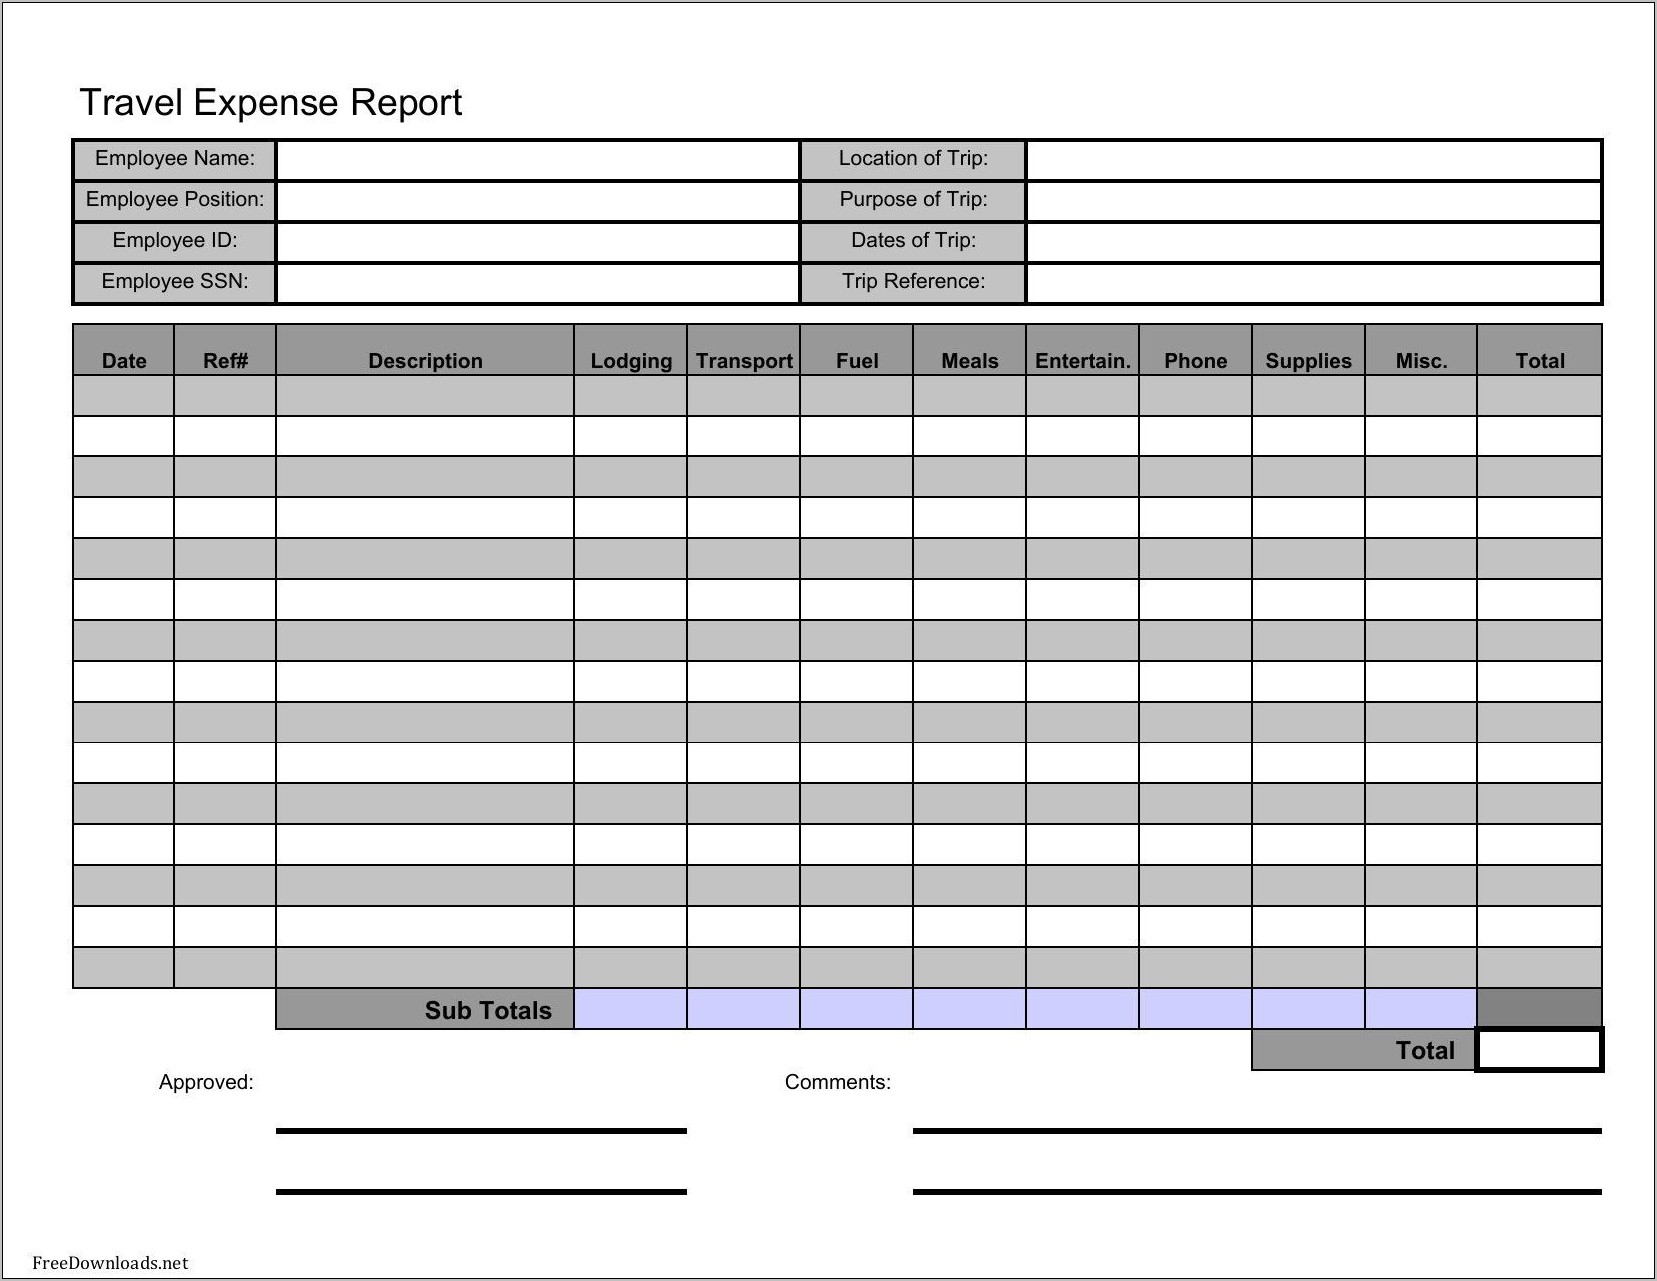 Business Expense Report Template